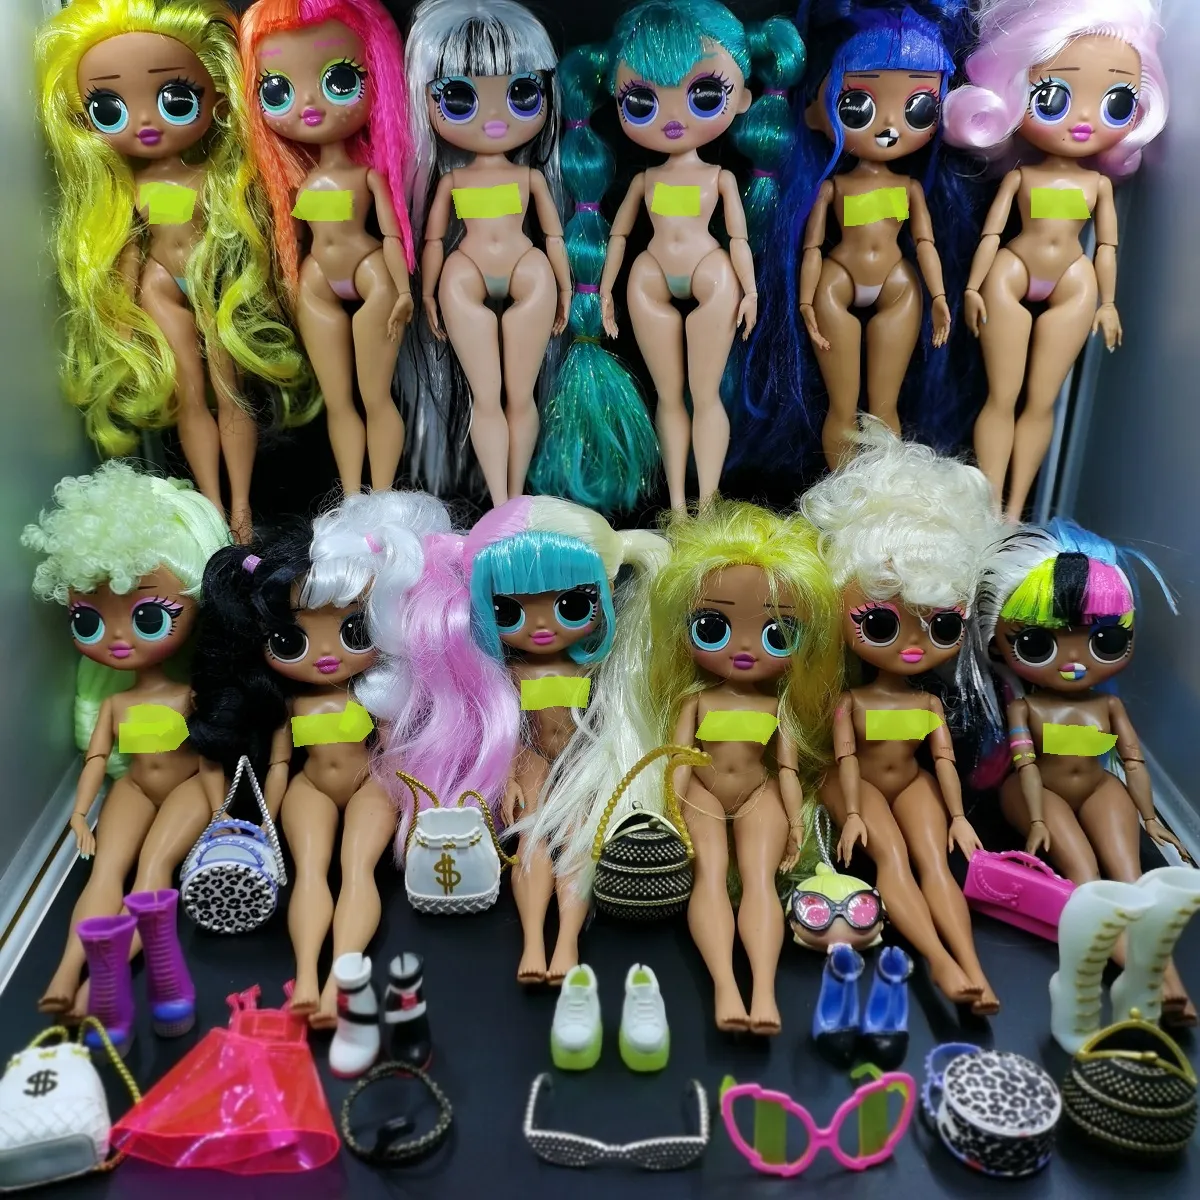 OMG Fashion Big Sister Series Mini Lol Dolls Choose From Multiple Styles  Original And New Girl Toy From Fuzhuang3, $35.02